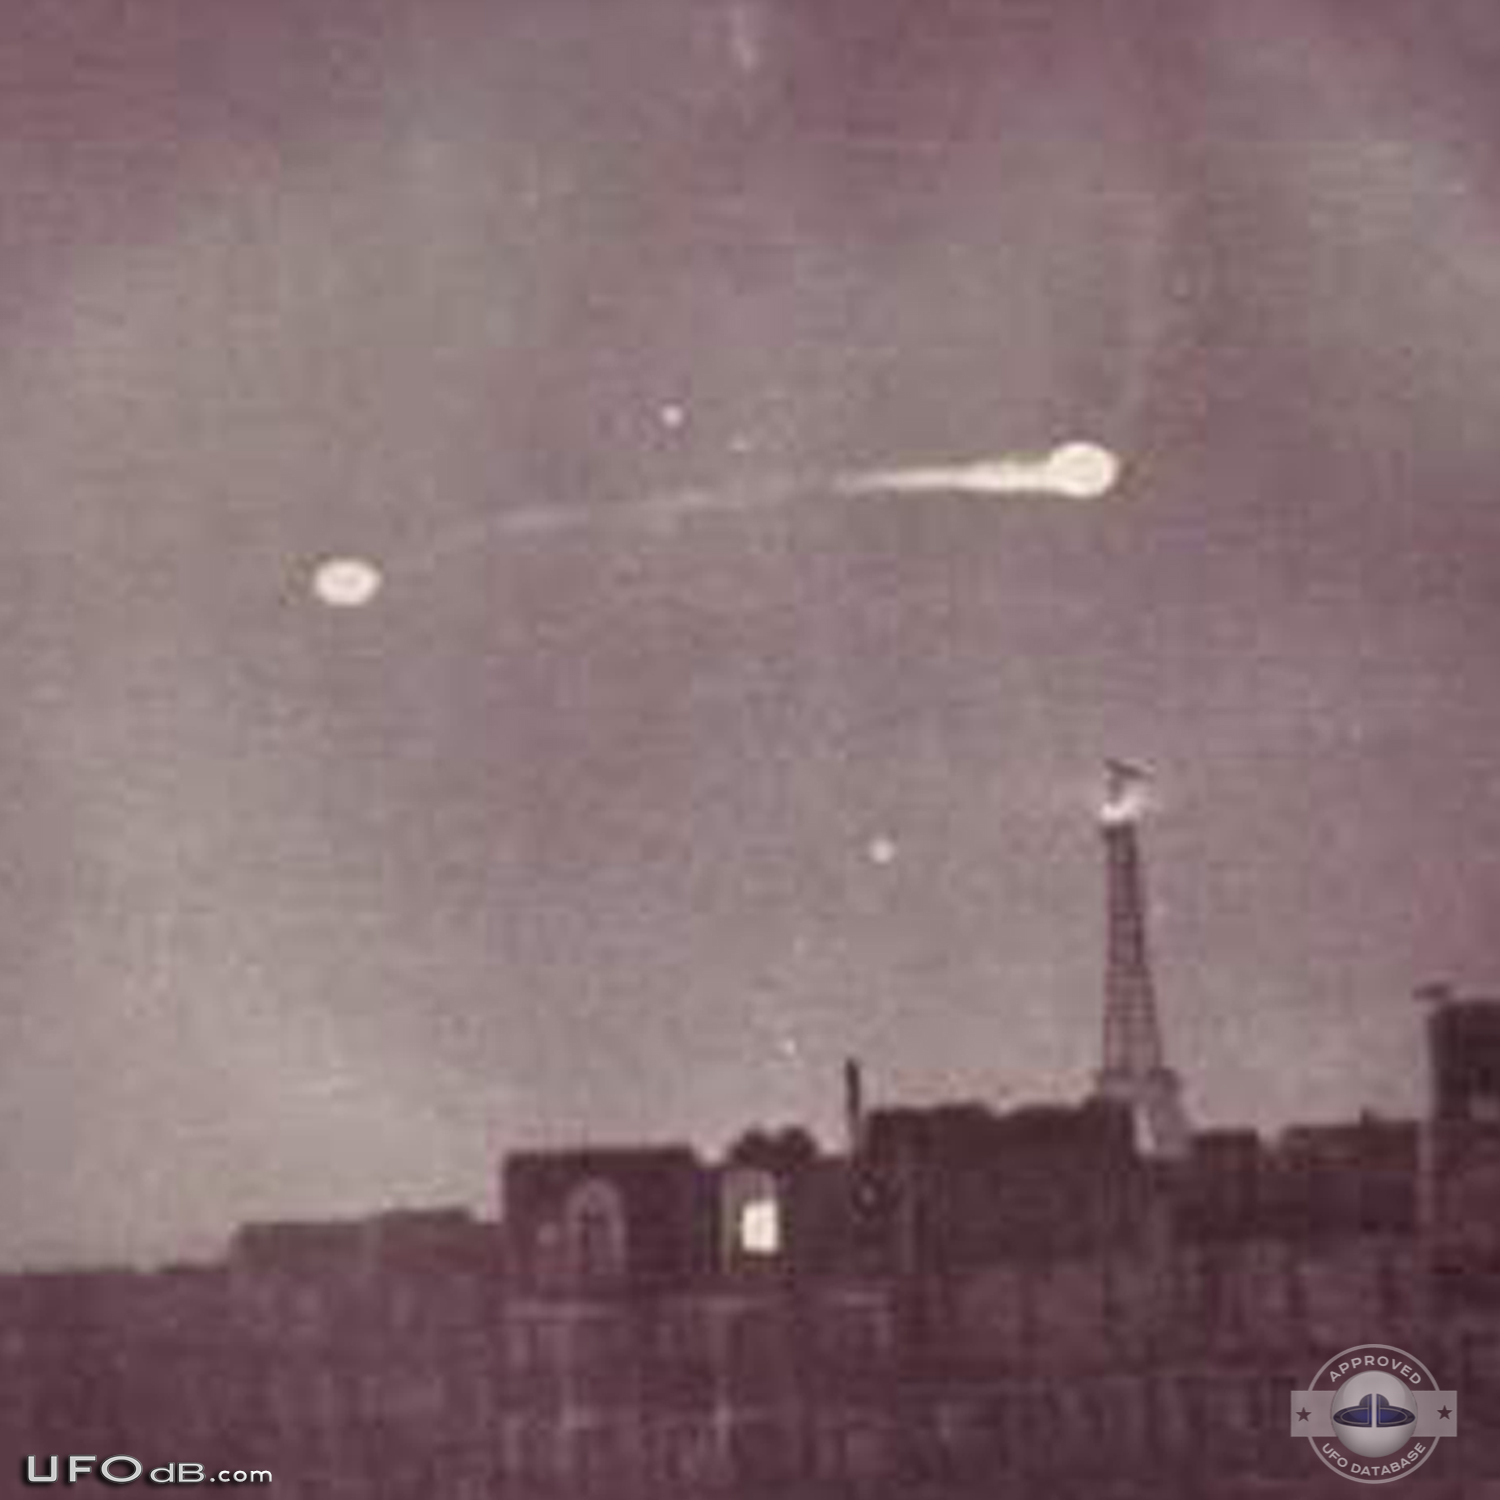 Old 1953 UFO sighting picture caught over Paris, France UFO Picture #543-3